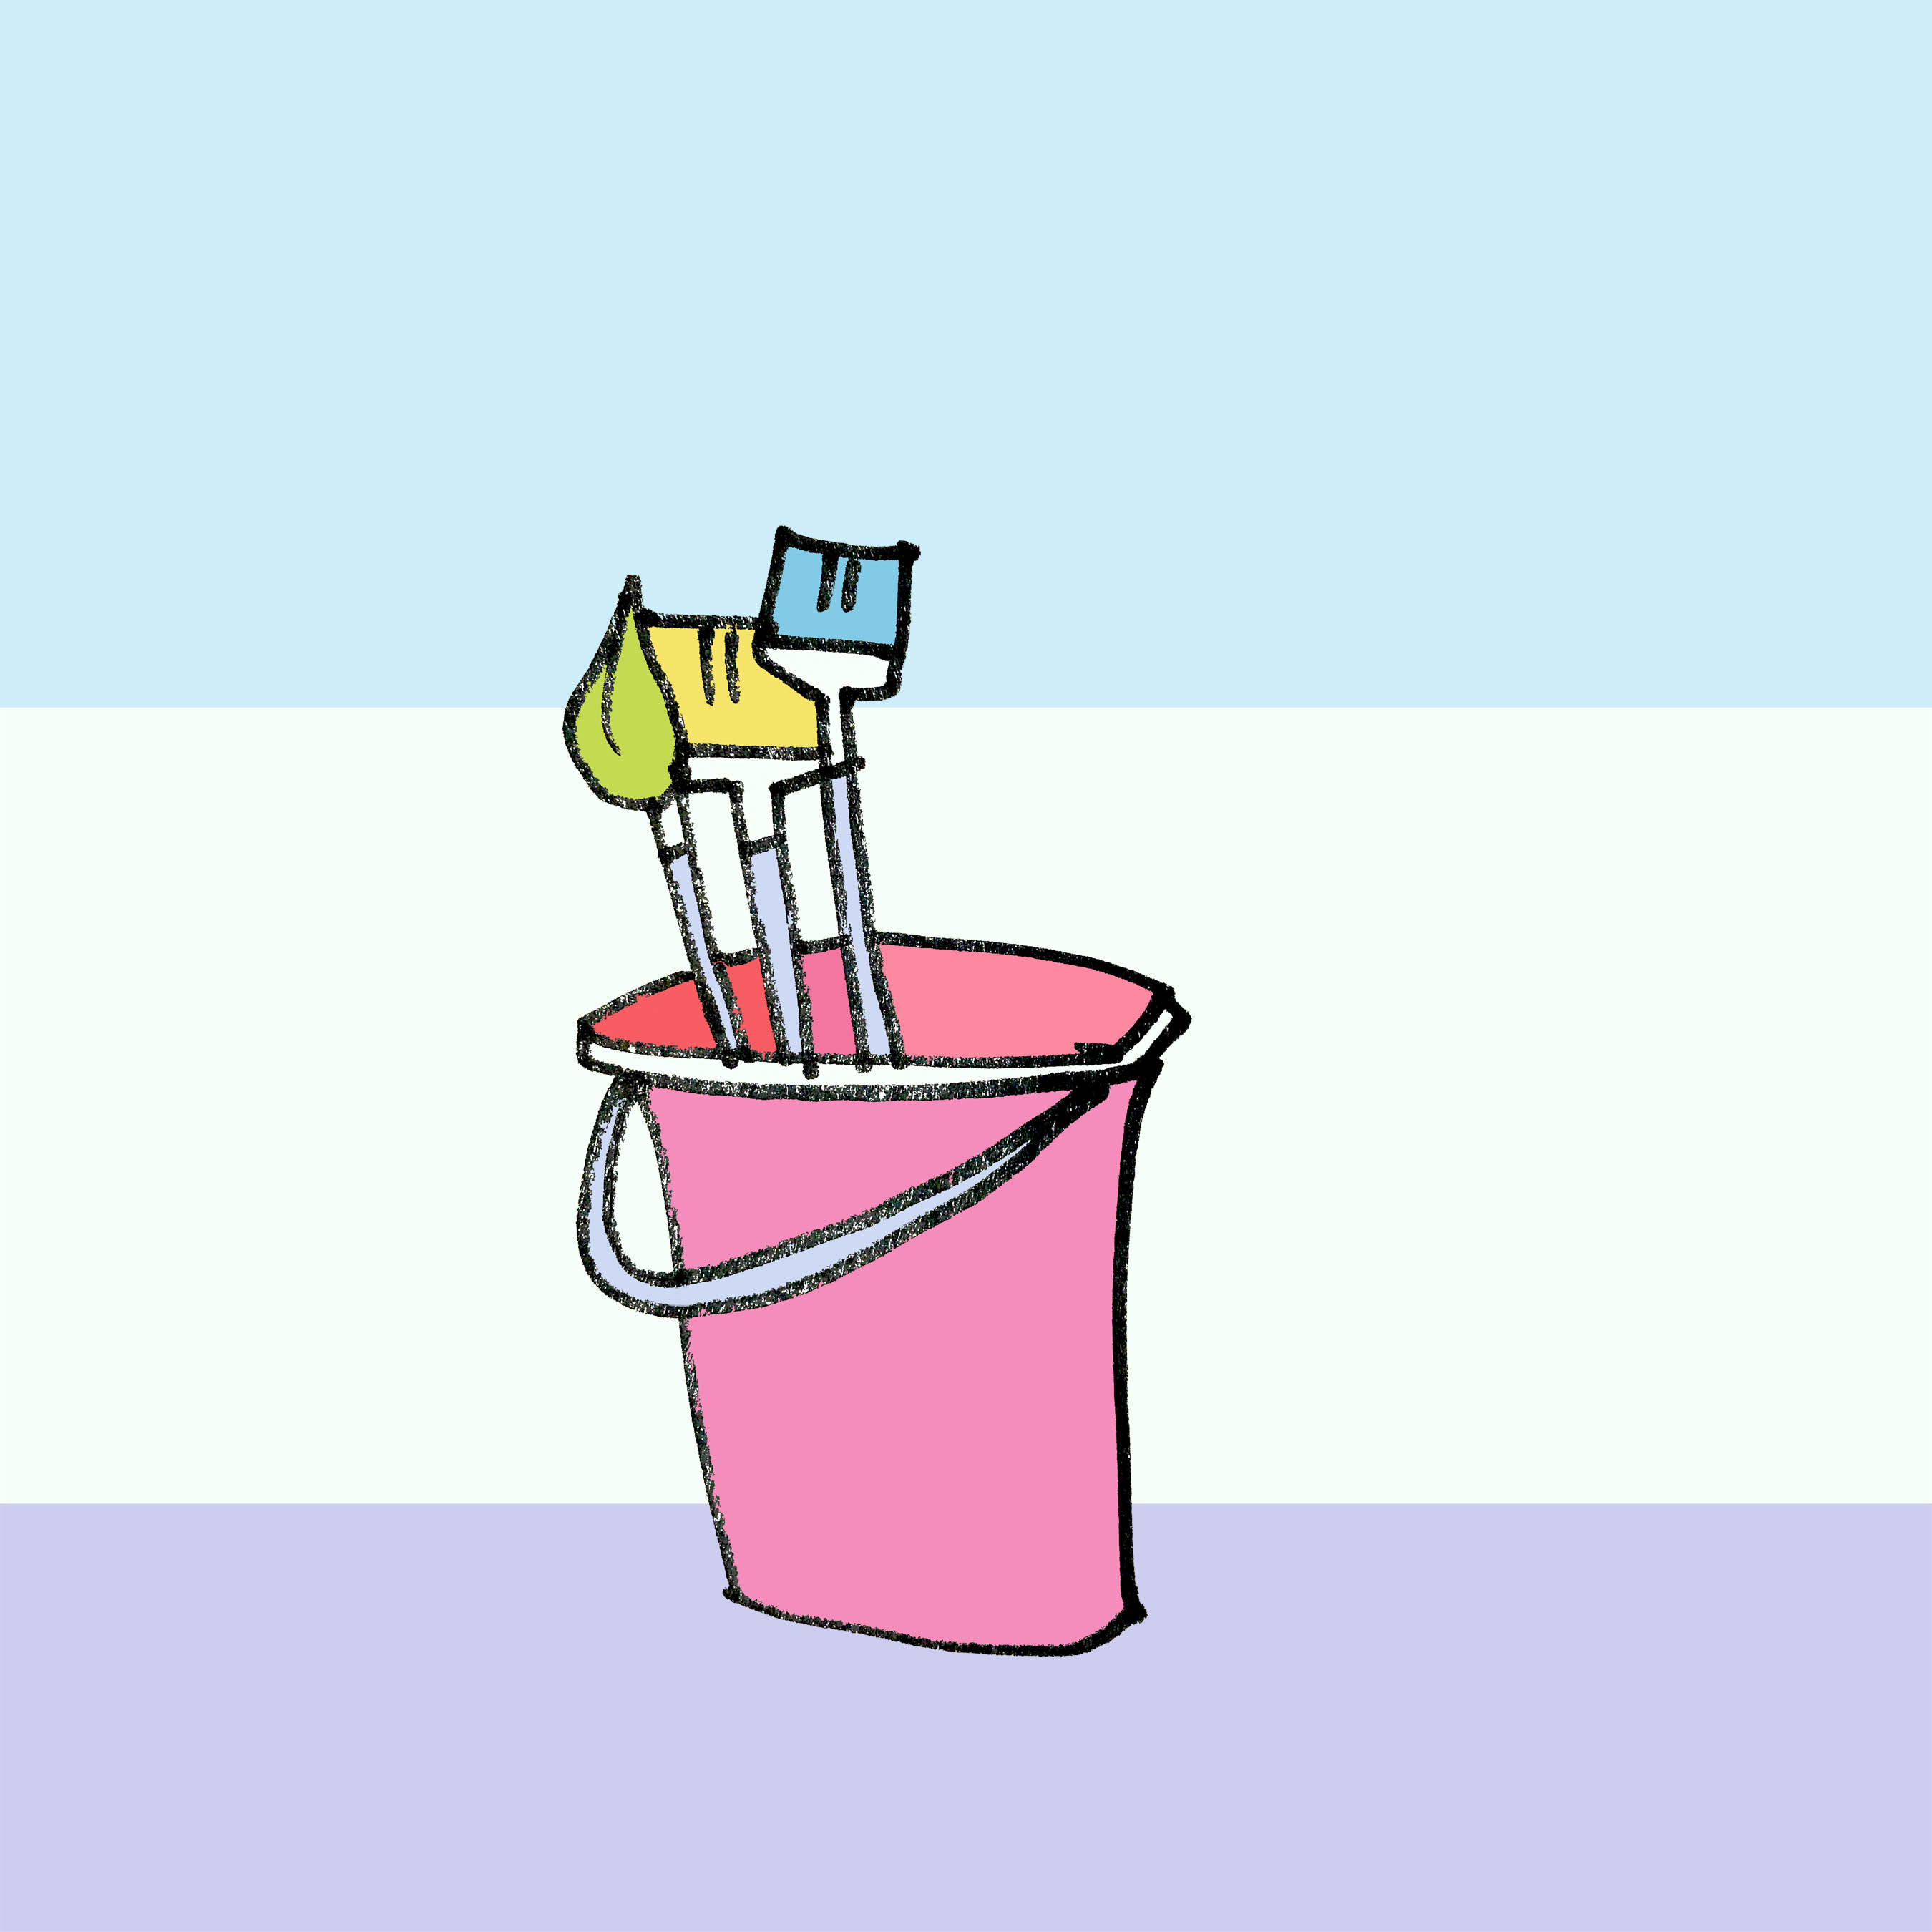 art every day number 575 / illustration / paint bucket